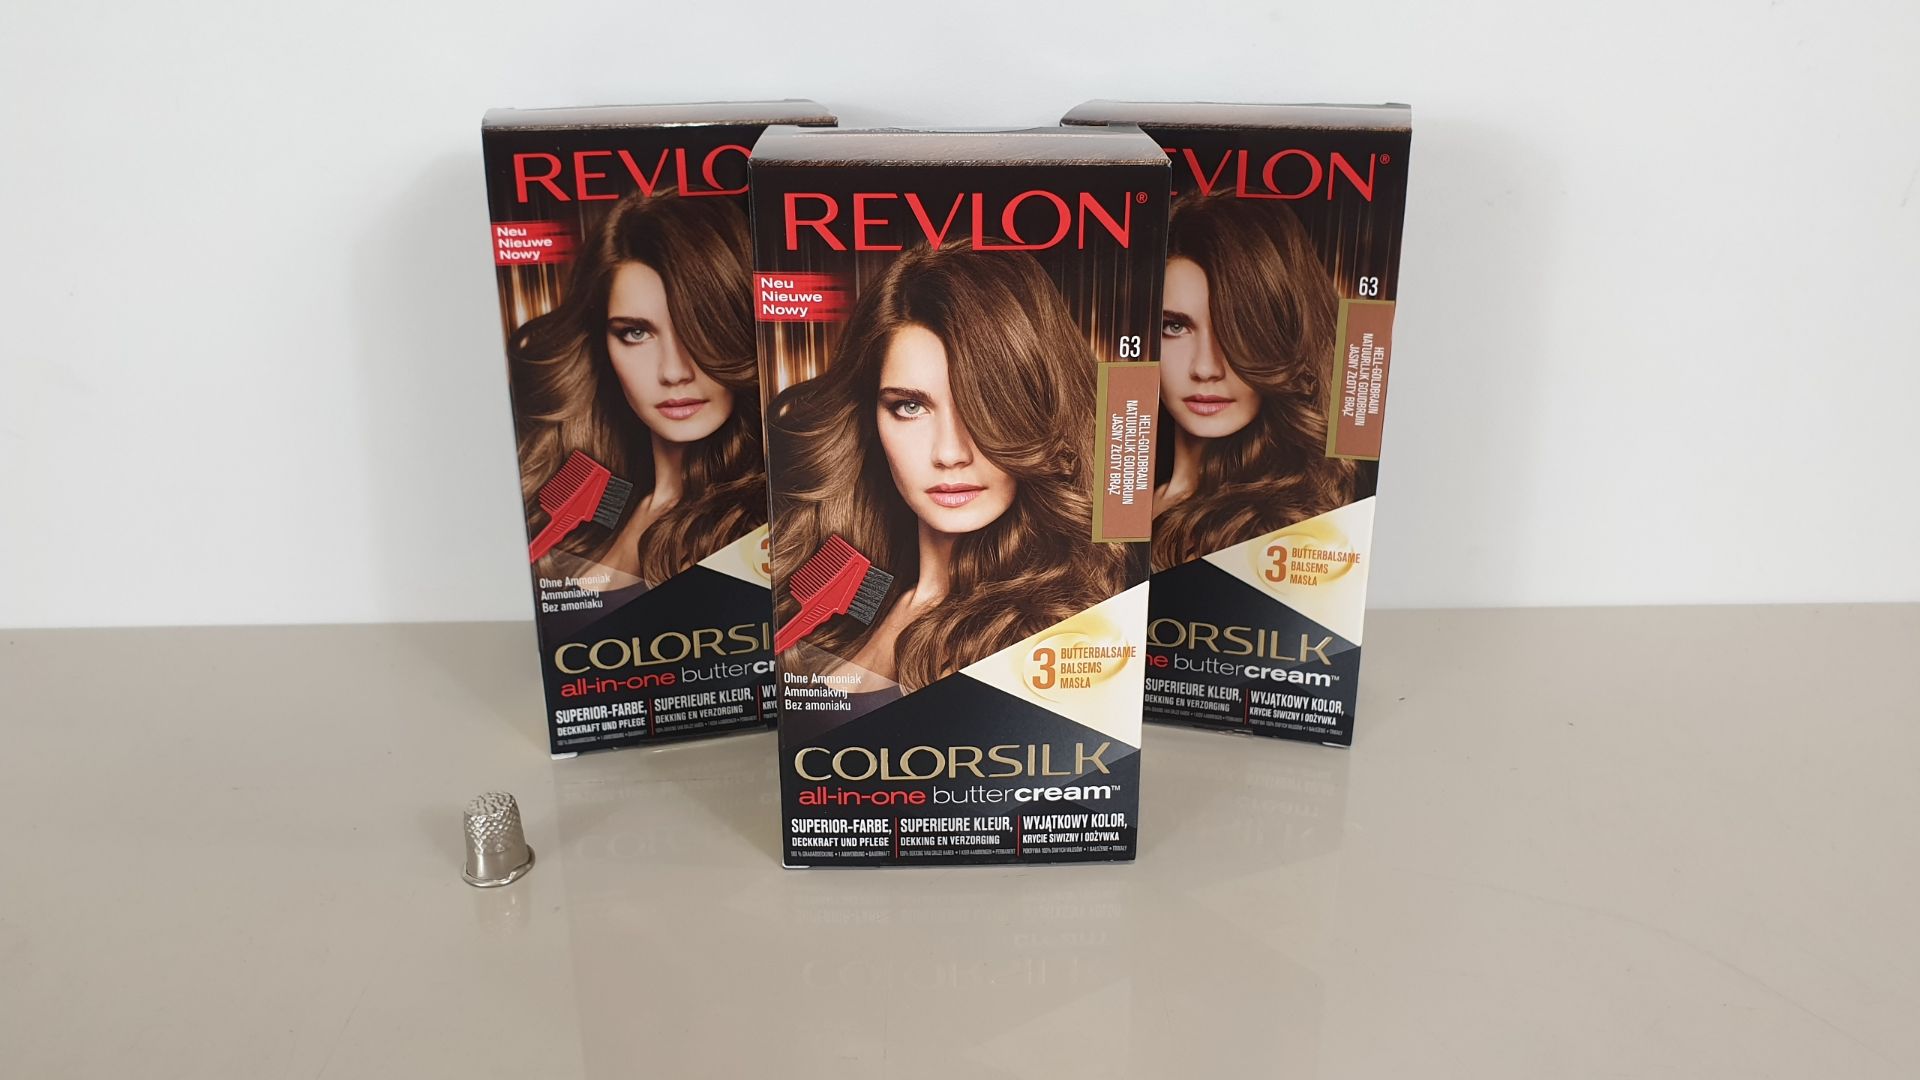 60 X BRAND NEW BOXED REVLON ( COLORSILK ALL IN ONE) GOLDEN BROWN BUTTERCREAM - IN 5 BOXES